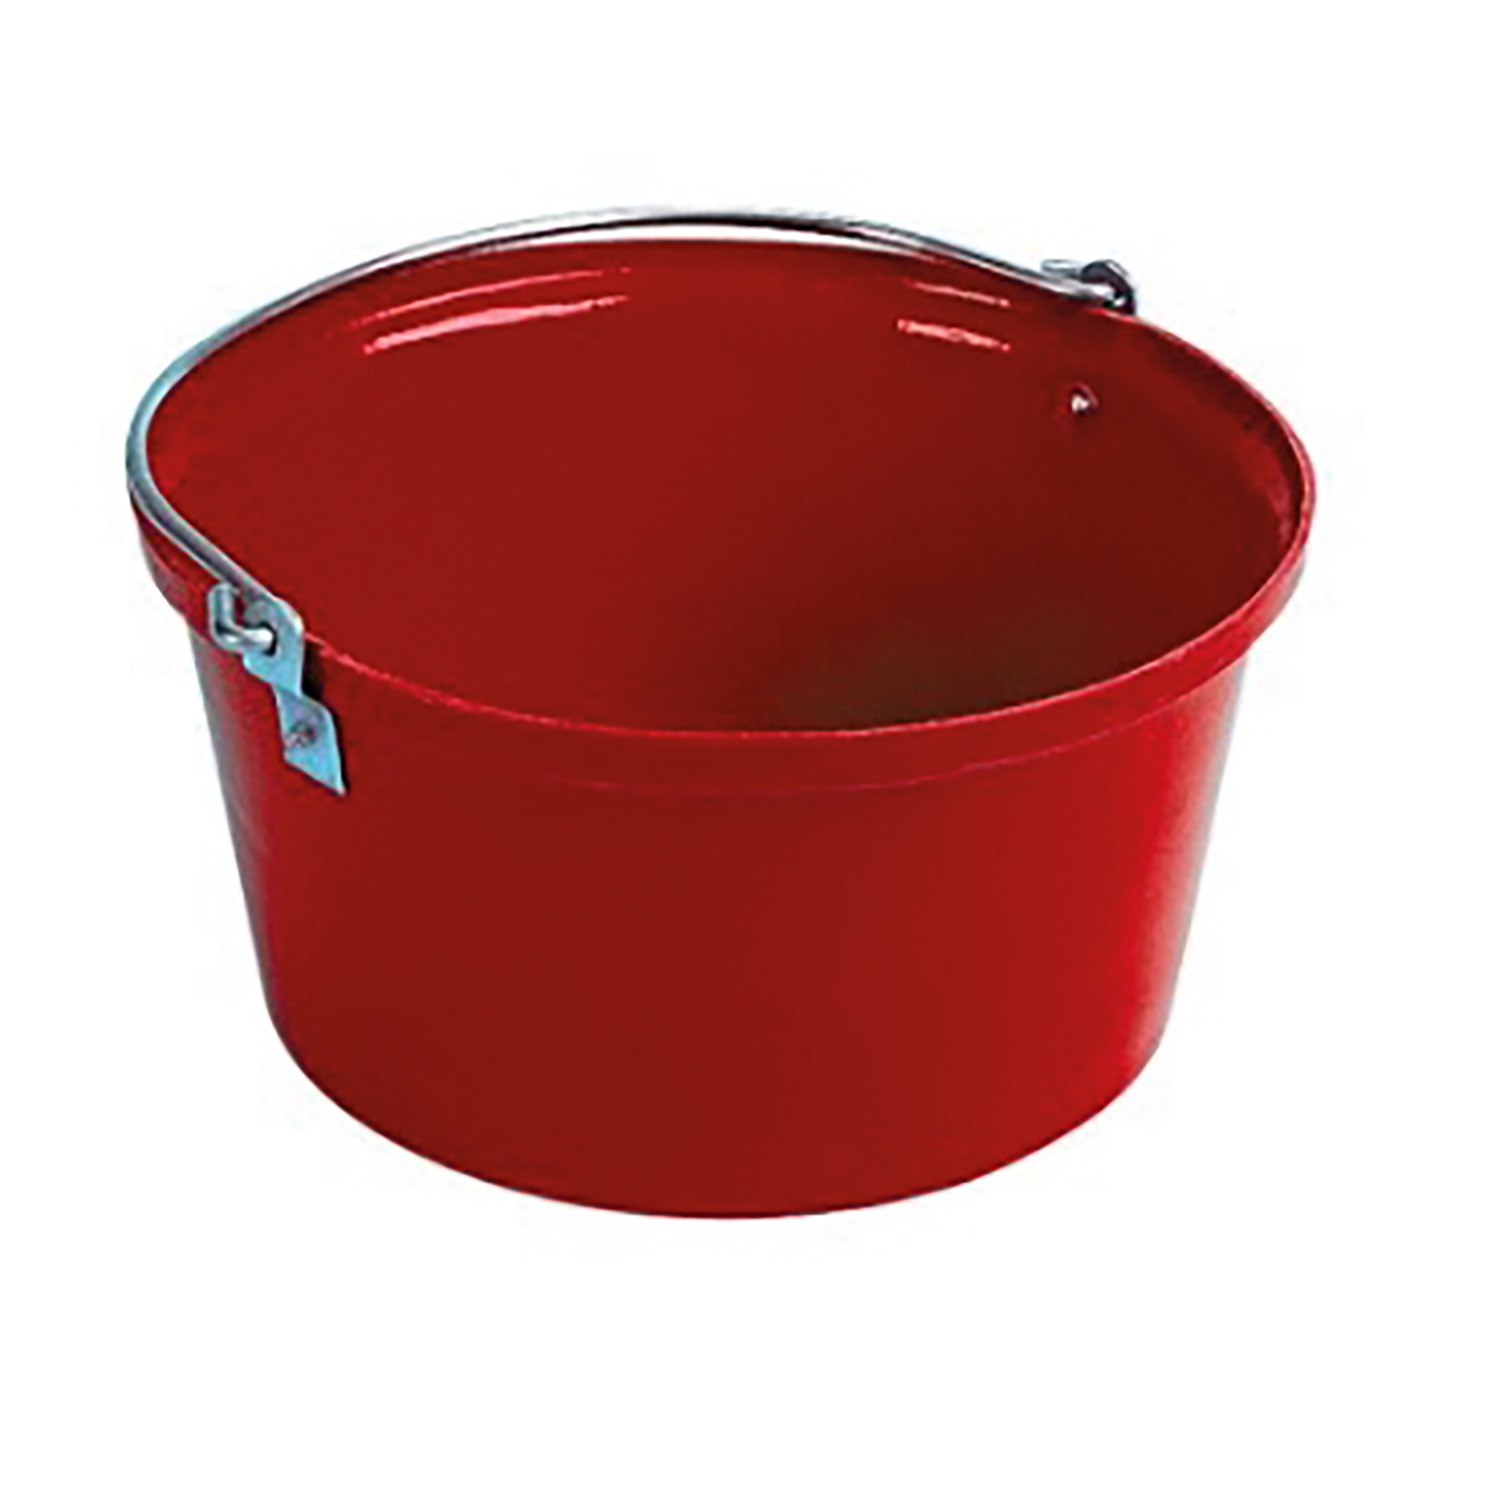 STUBBS FEED BUCKET SHALLOW 16 LT S43M RED 16 LT